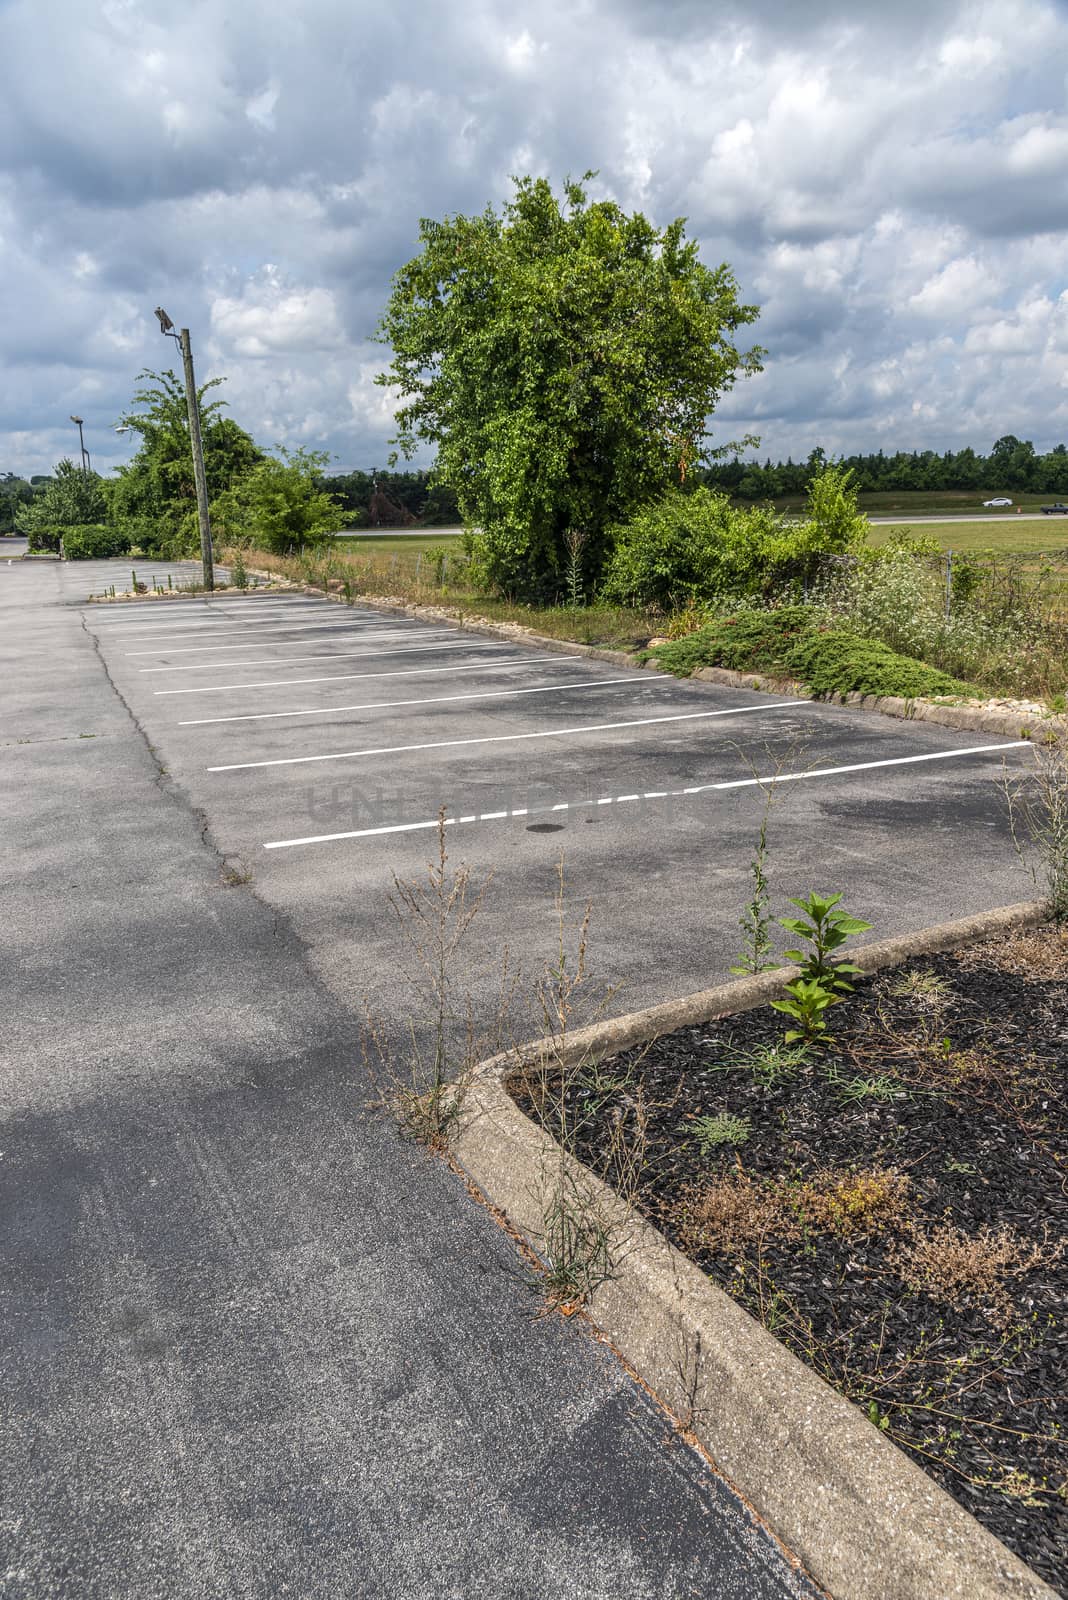 Overgrown Empty Parking Lot of Failed Restaurant After Pandemic by stockbuster1